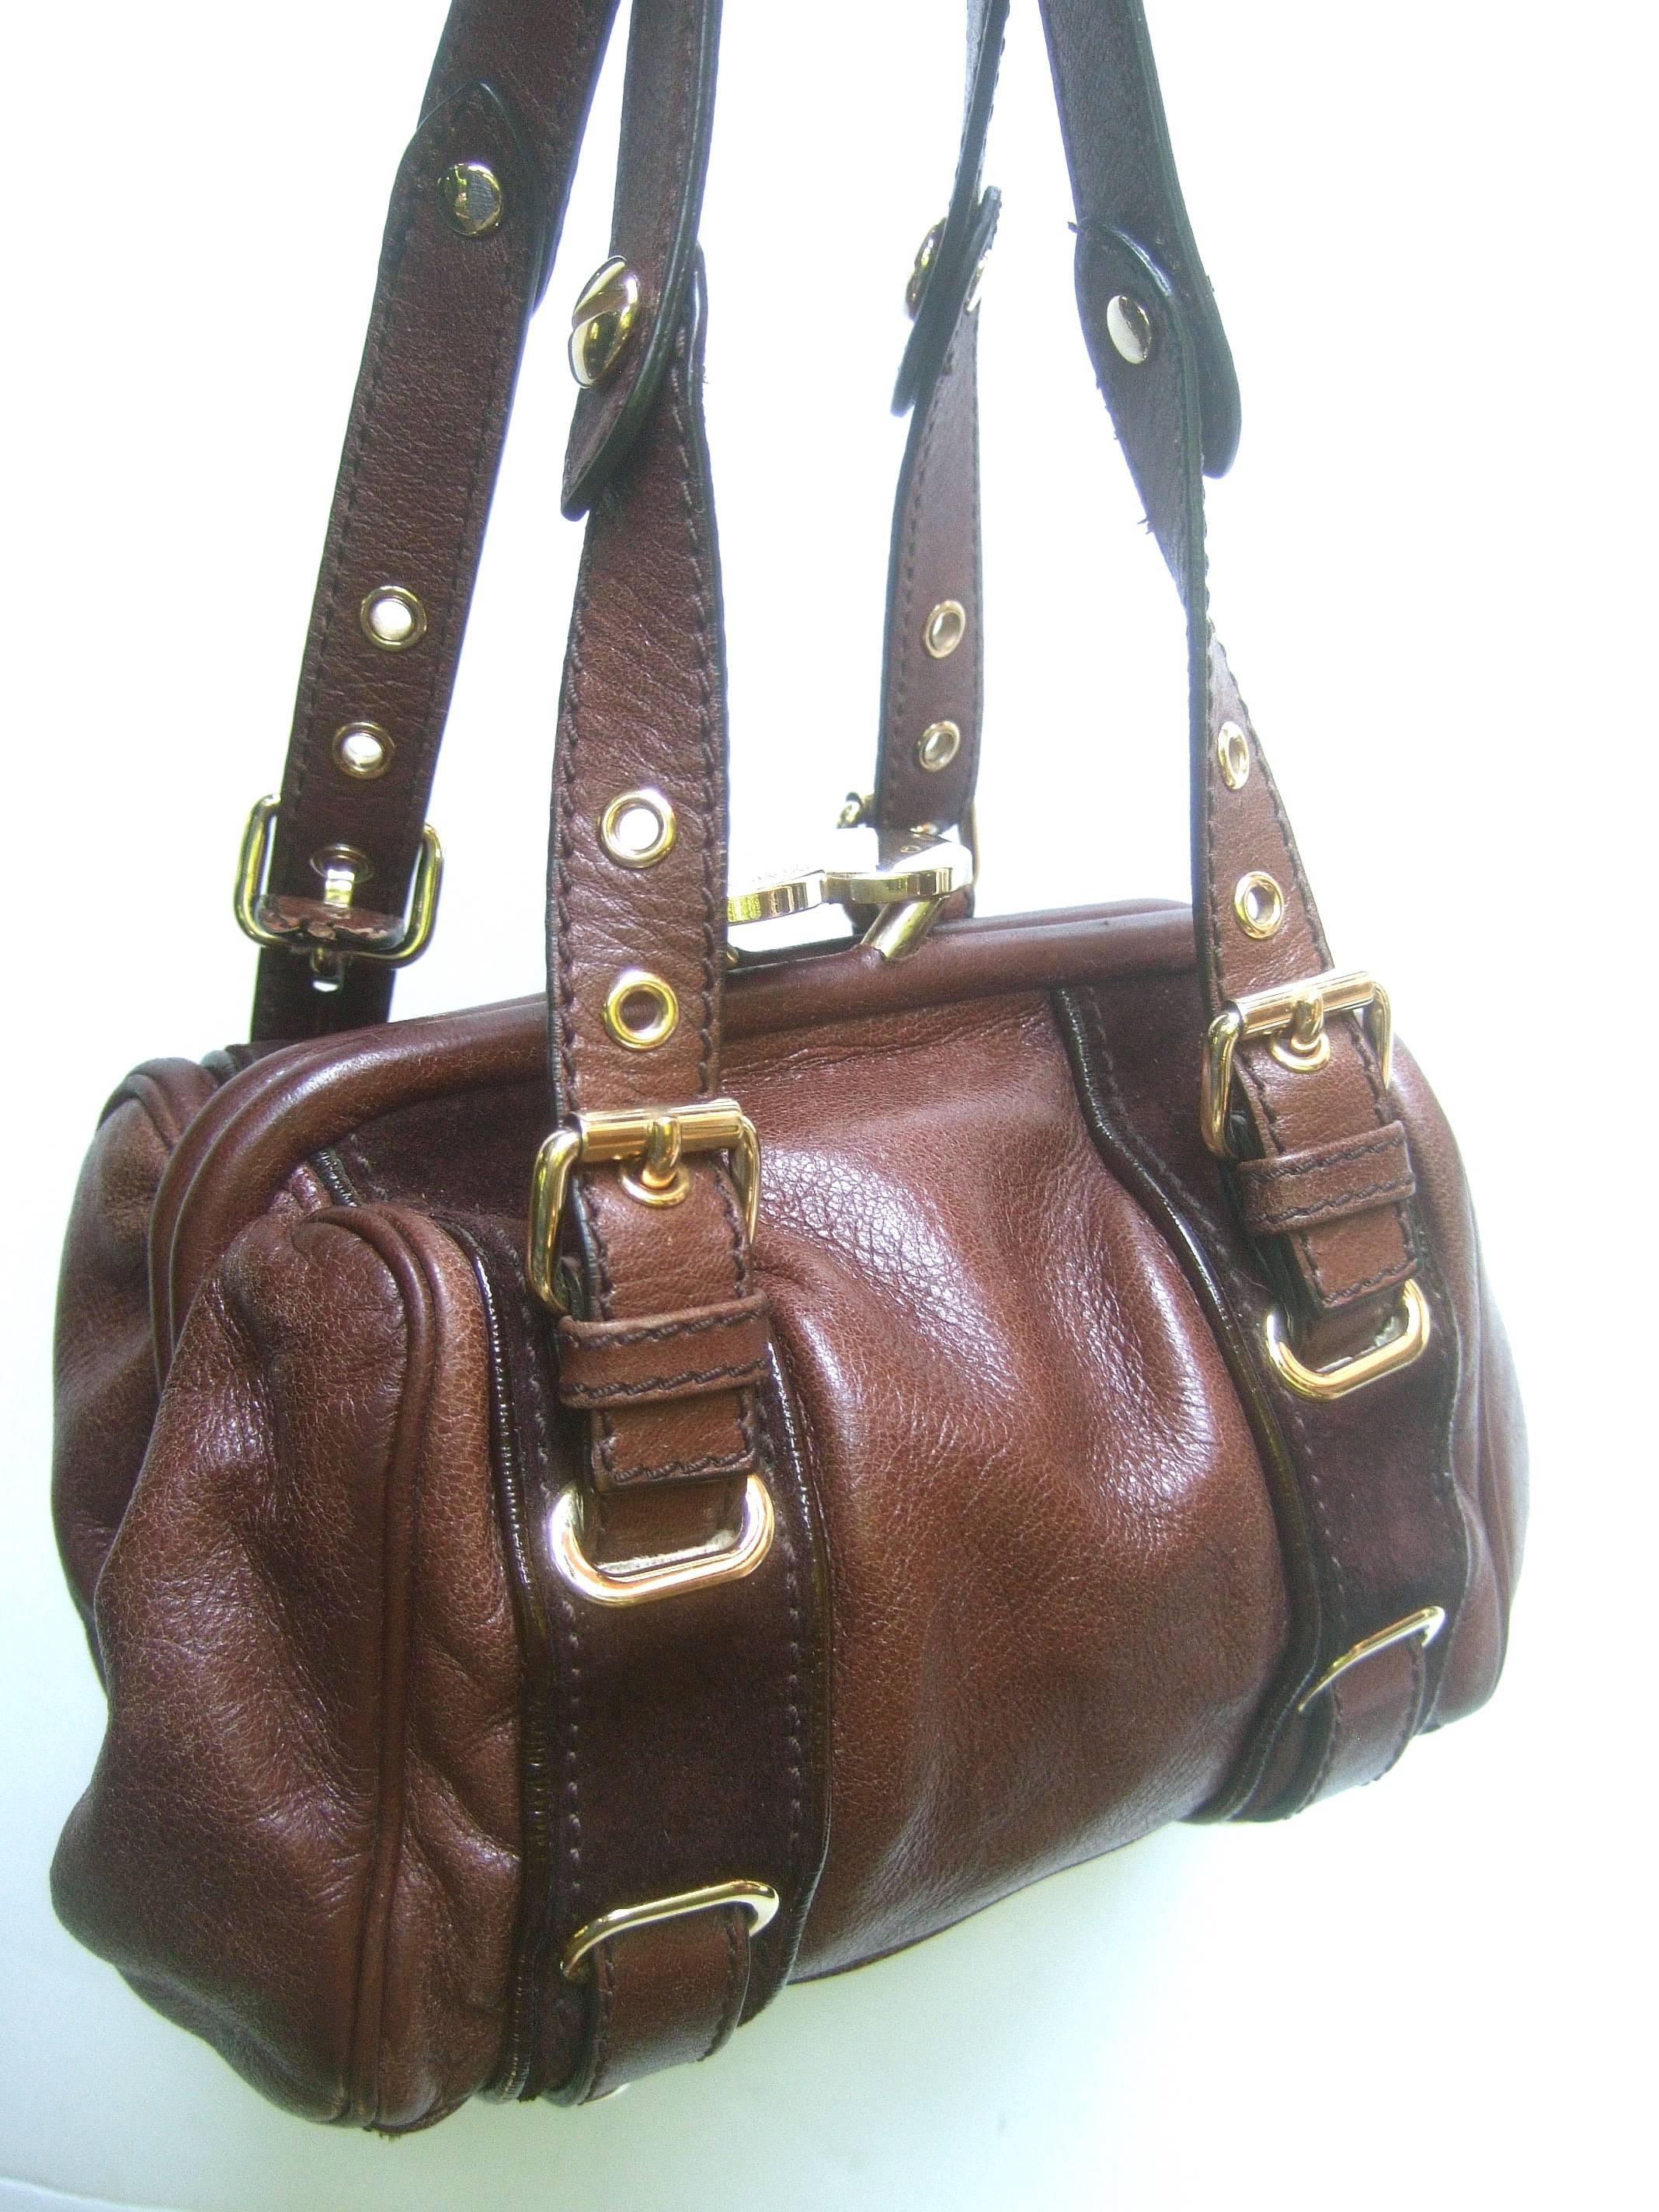 Marc Jacobs Italian brown leather diminutive handbag 
The stylish compact Italian handbag is covered with supple
mocha brown leather 

Designed with sleek gilt metal hardware and buckles 
Accented with a pair of brown suede vertical stripes
The kiss